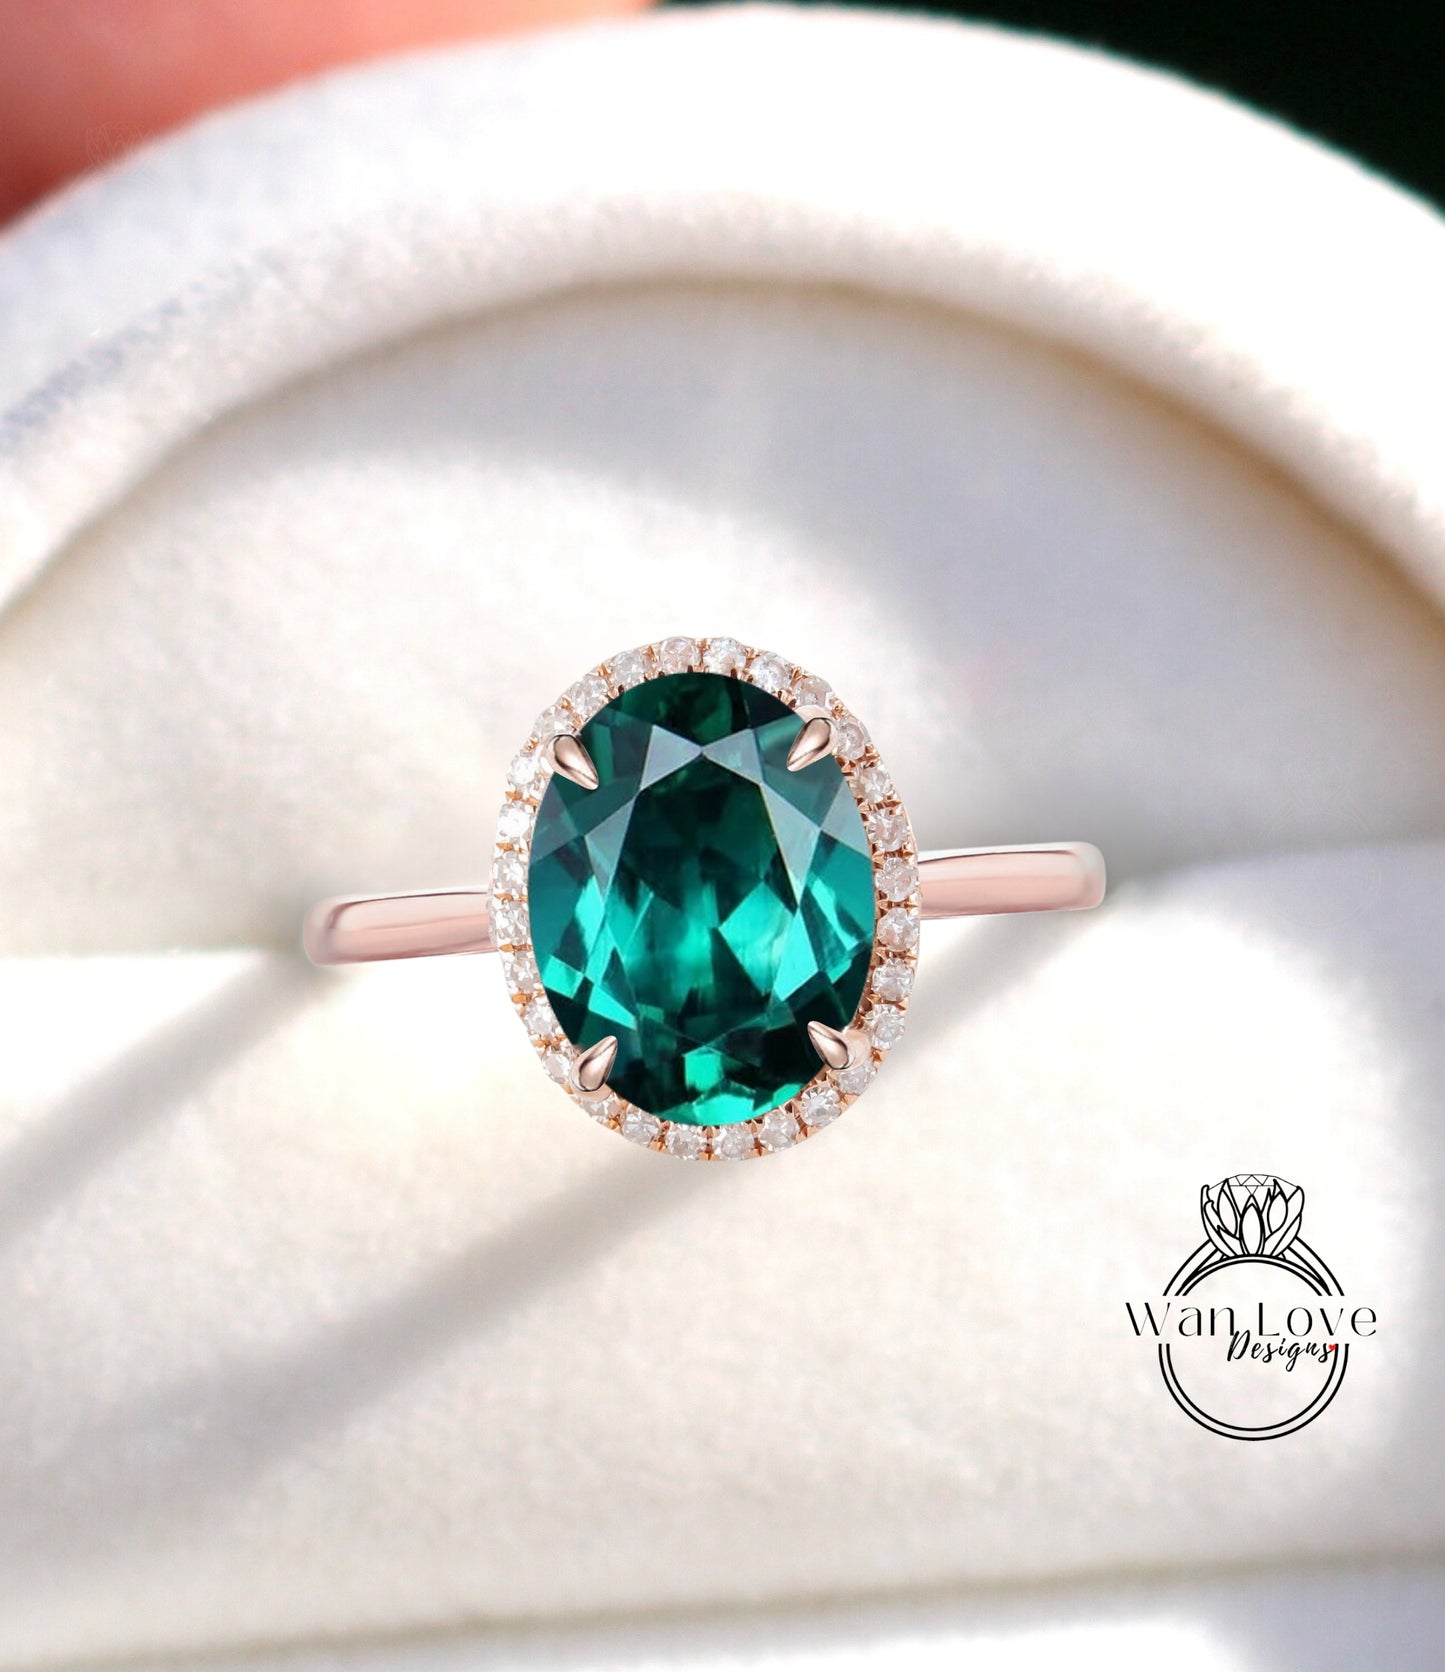 Oval cut Emerald engagement ring rose gold halo ring diamond halo tapered plain thin dainty band art deco anniversary promise ring